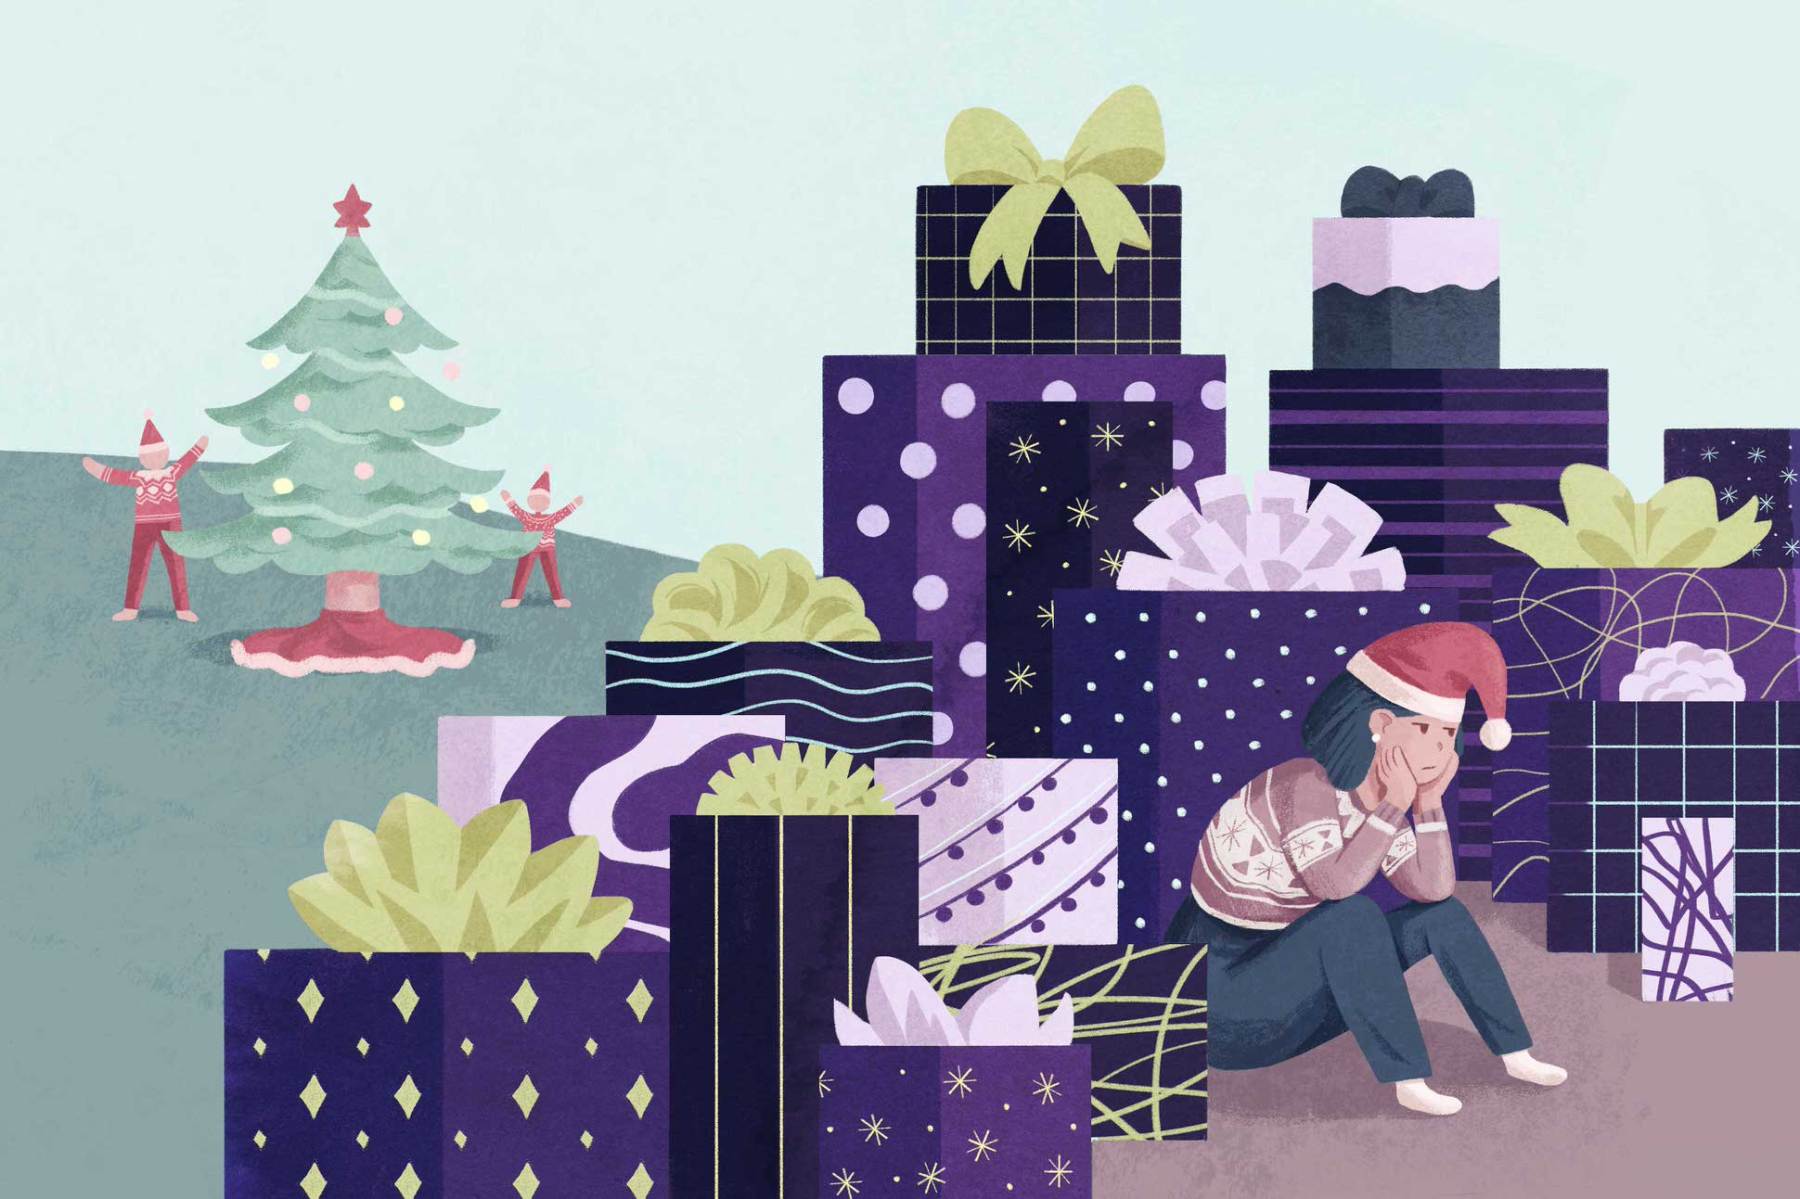 An illustration accompanying a story about "invisible labor," in which a woman sits by a pile of presents, quietly crying, as her children celebrate the holiday near a Christmas tree in the background.